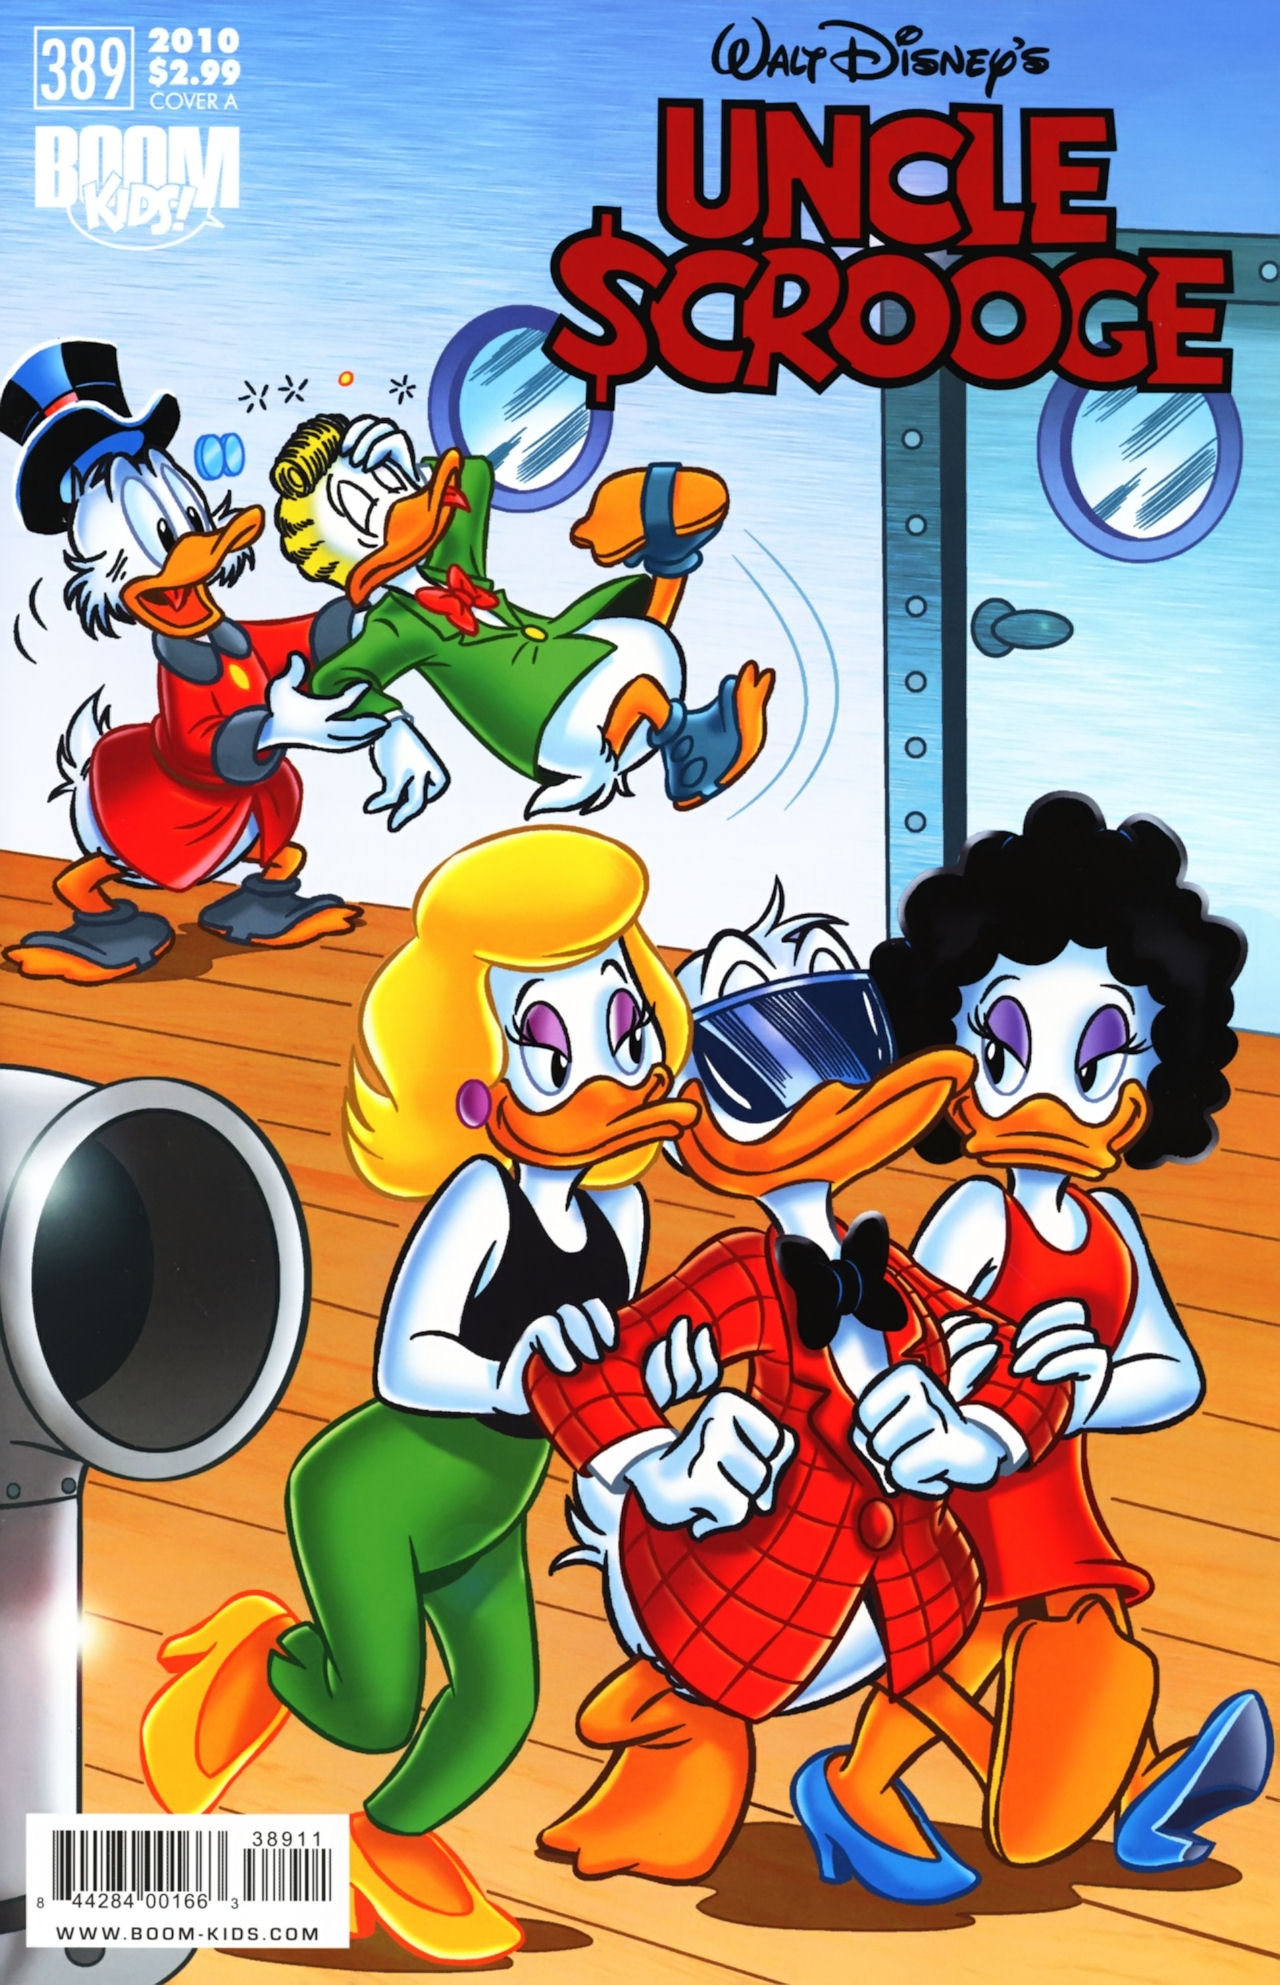 Read online Uncle Scrooge (2009) comic -  Issue #389 - 1